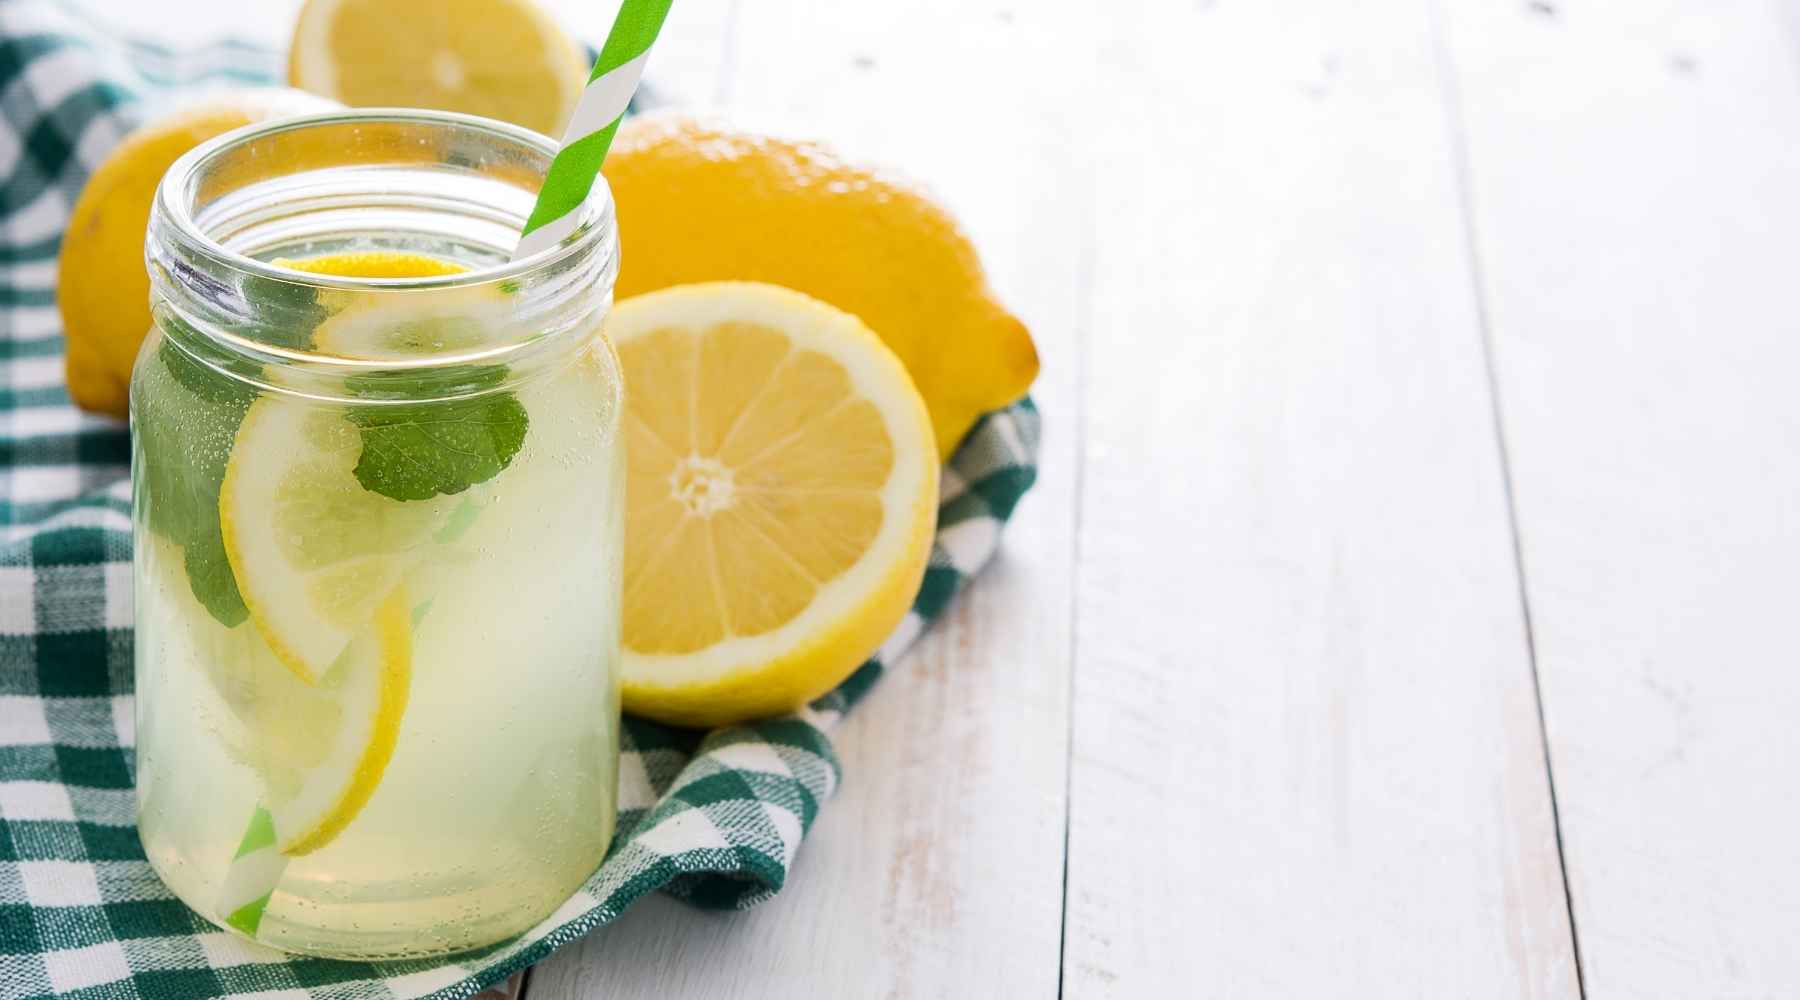 Master Cleanse Recipe and Diet Instructions - Feed Your Spirit